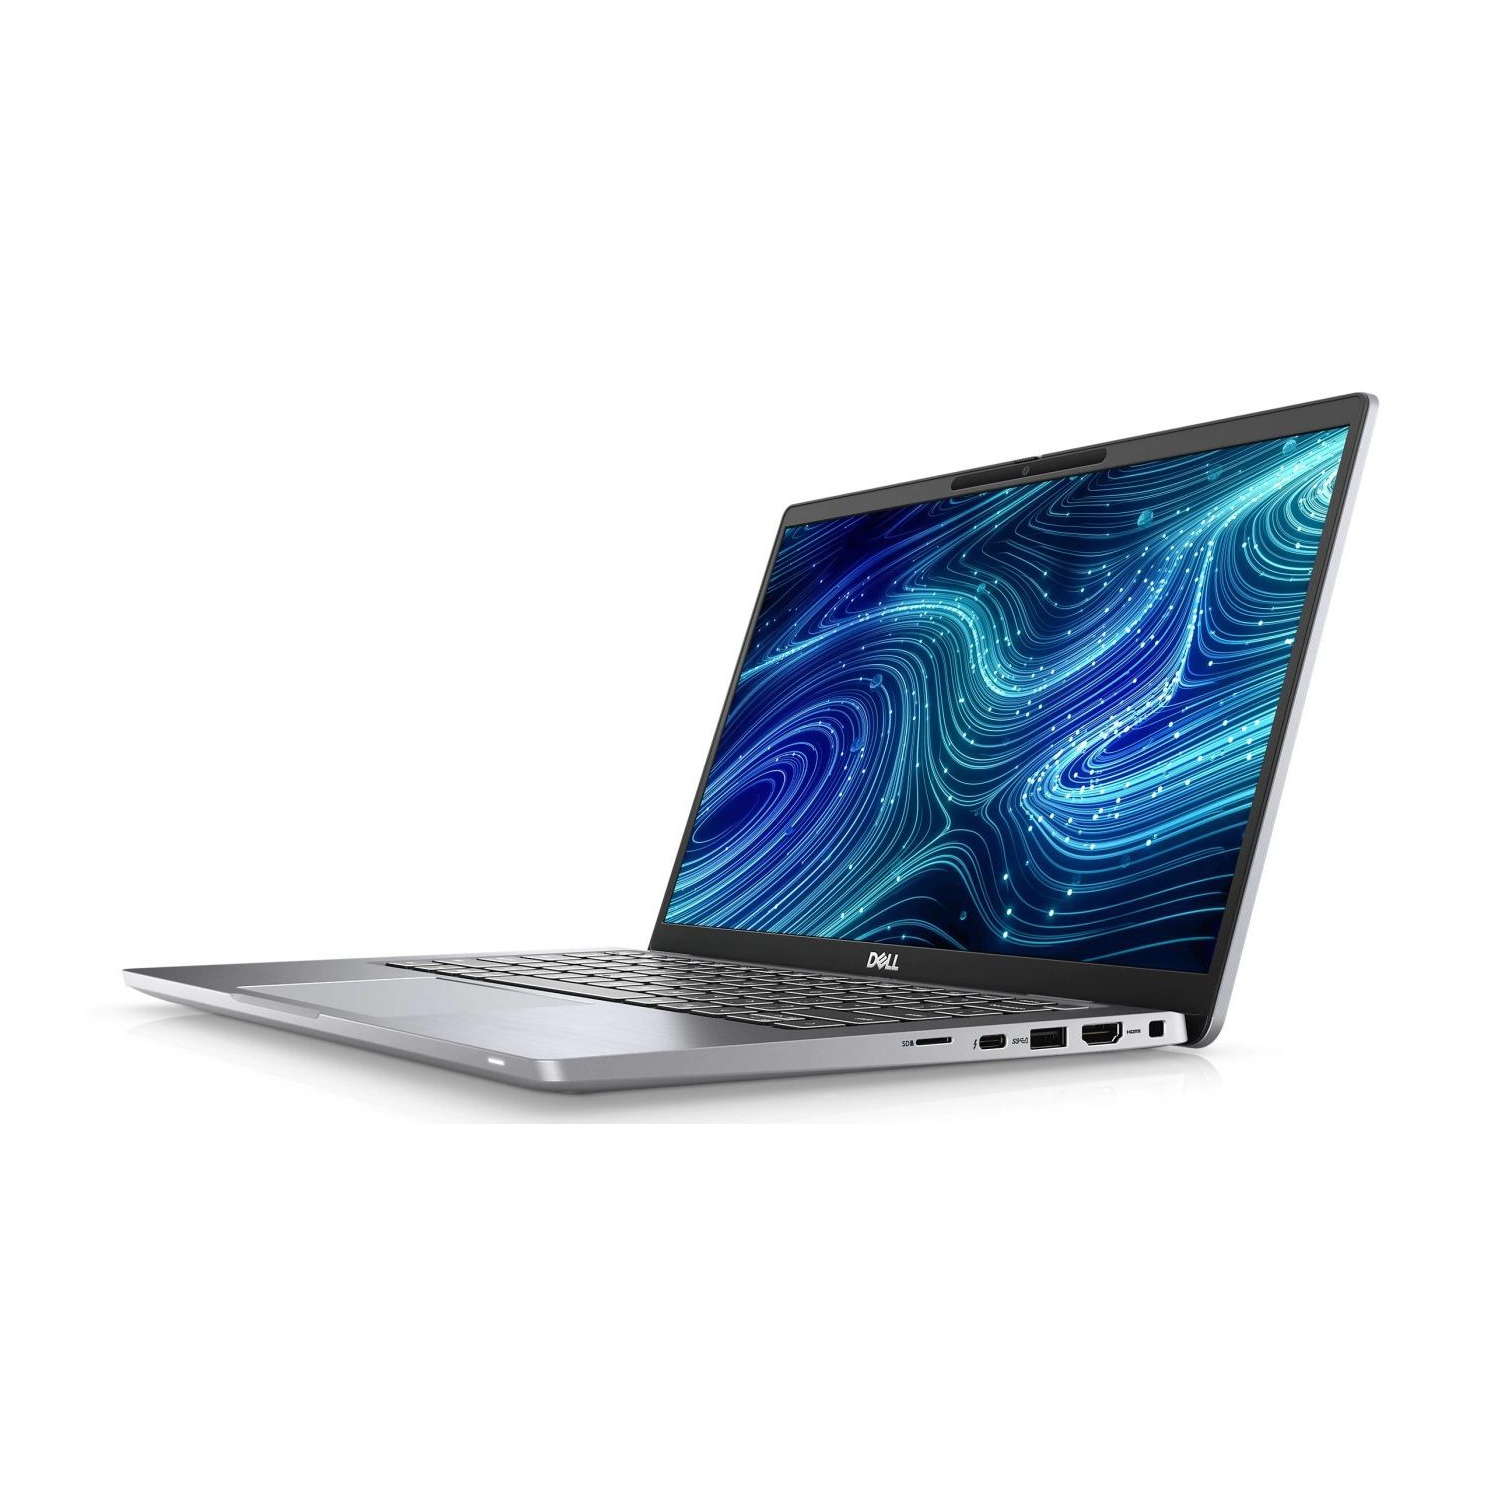 Refurbished (Excellent) - Dell Latitude 7000 7420 Laptop (2021) | 14" FHD Touch | Core i5 - 256GB SSD - 16GB RAM | 4 Cores @ 4.4 GHz - 11th Gen CPU Certified Refurbished